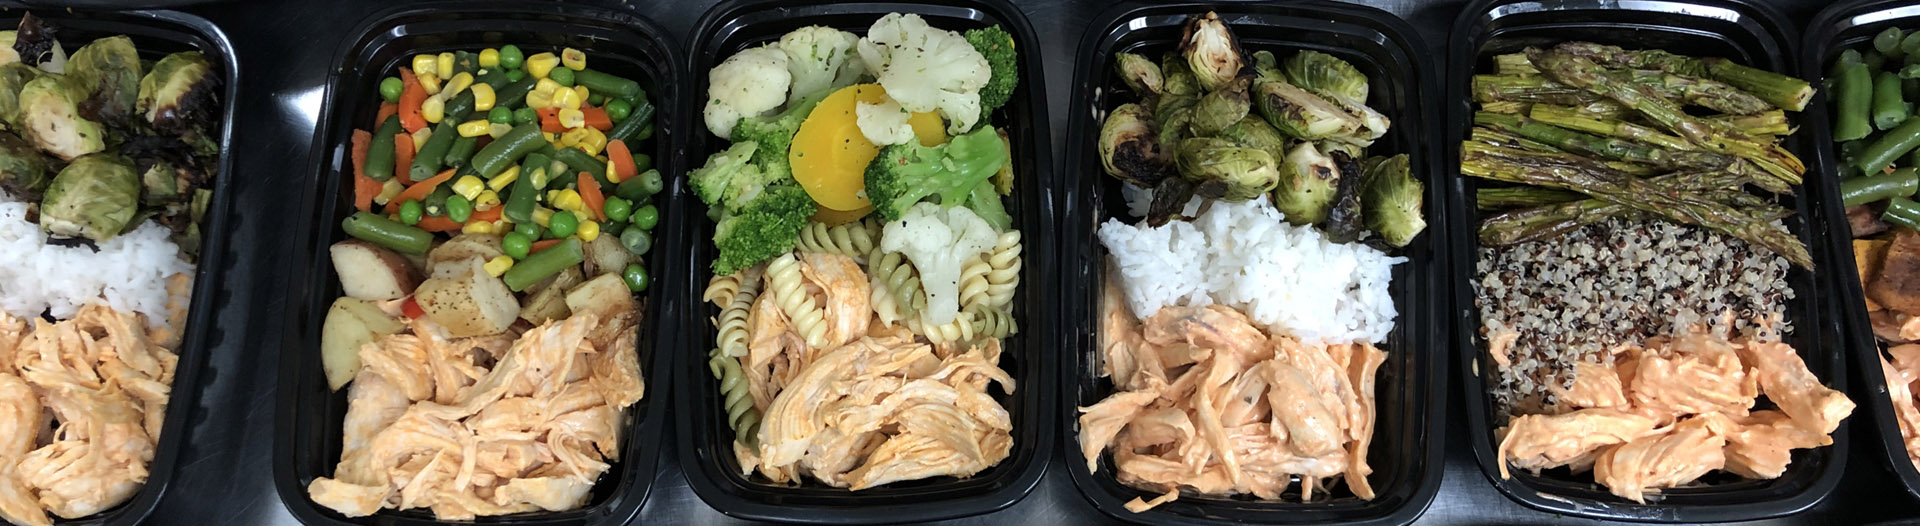 healthy premade meal trays - food 4 fuel rockford il